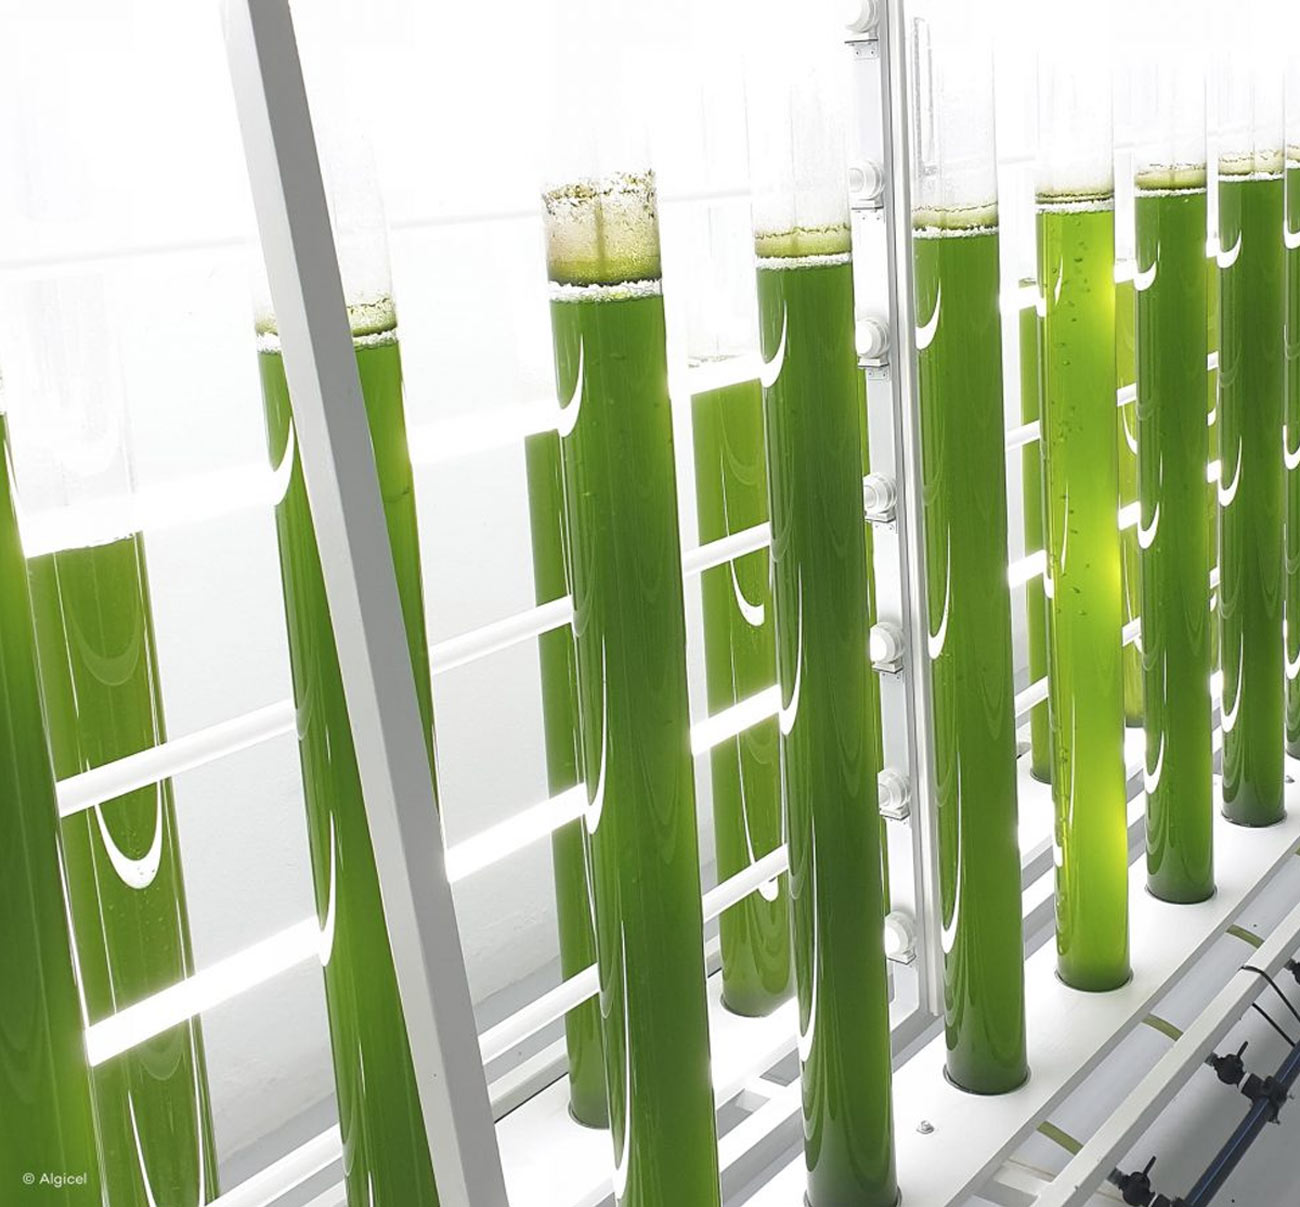 multiple acrylic tubes filled with cultivated micro-algae